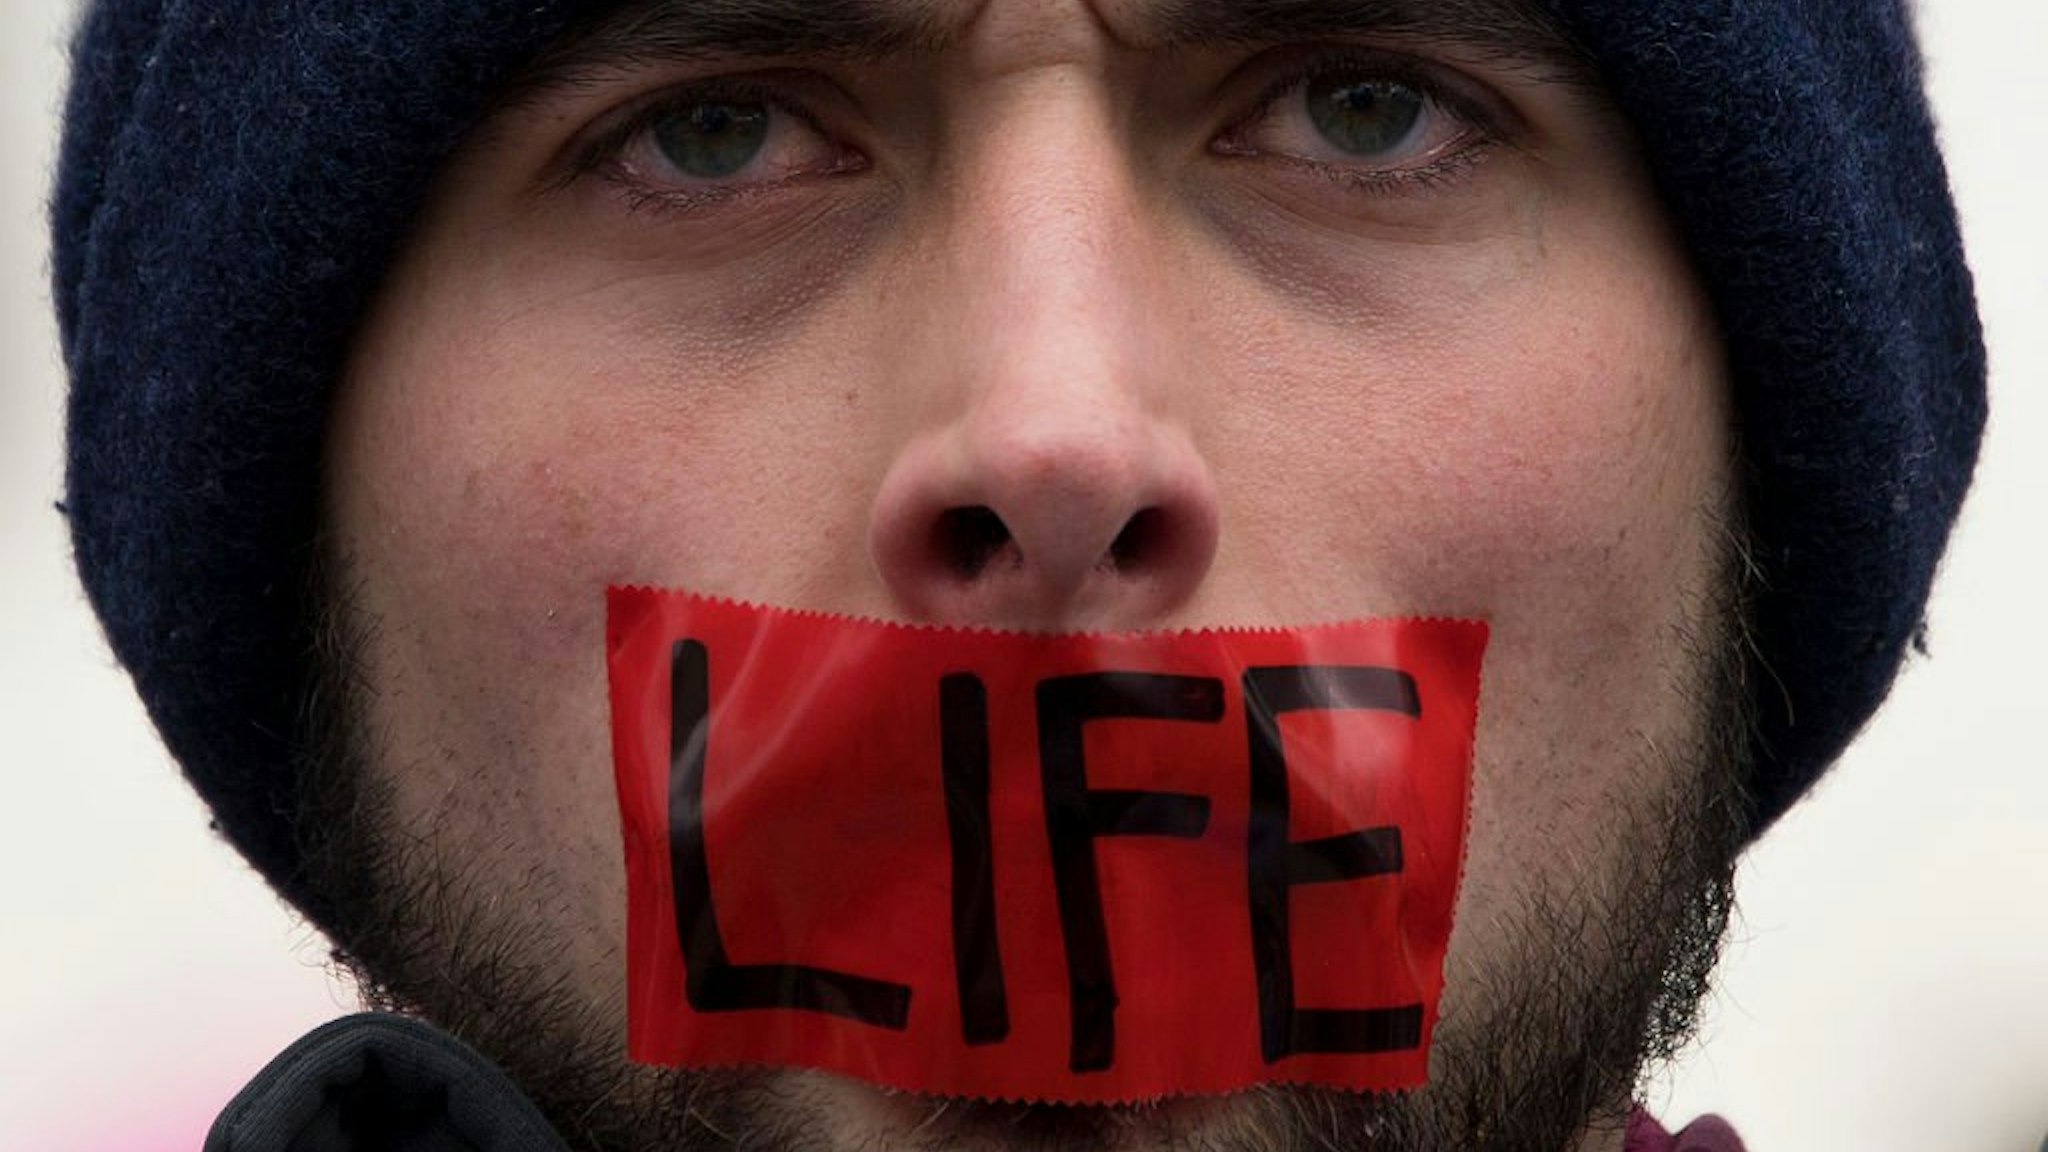 A man wears tape over his mouth during protests at the 44th annual March for Life on January 27, 2017 in Washington, DC. Anti-abortion activists are gathering for the 44th annual March for Life in Washington, protesting the 1973 Supreme Court decision leg